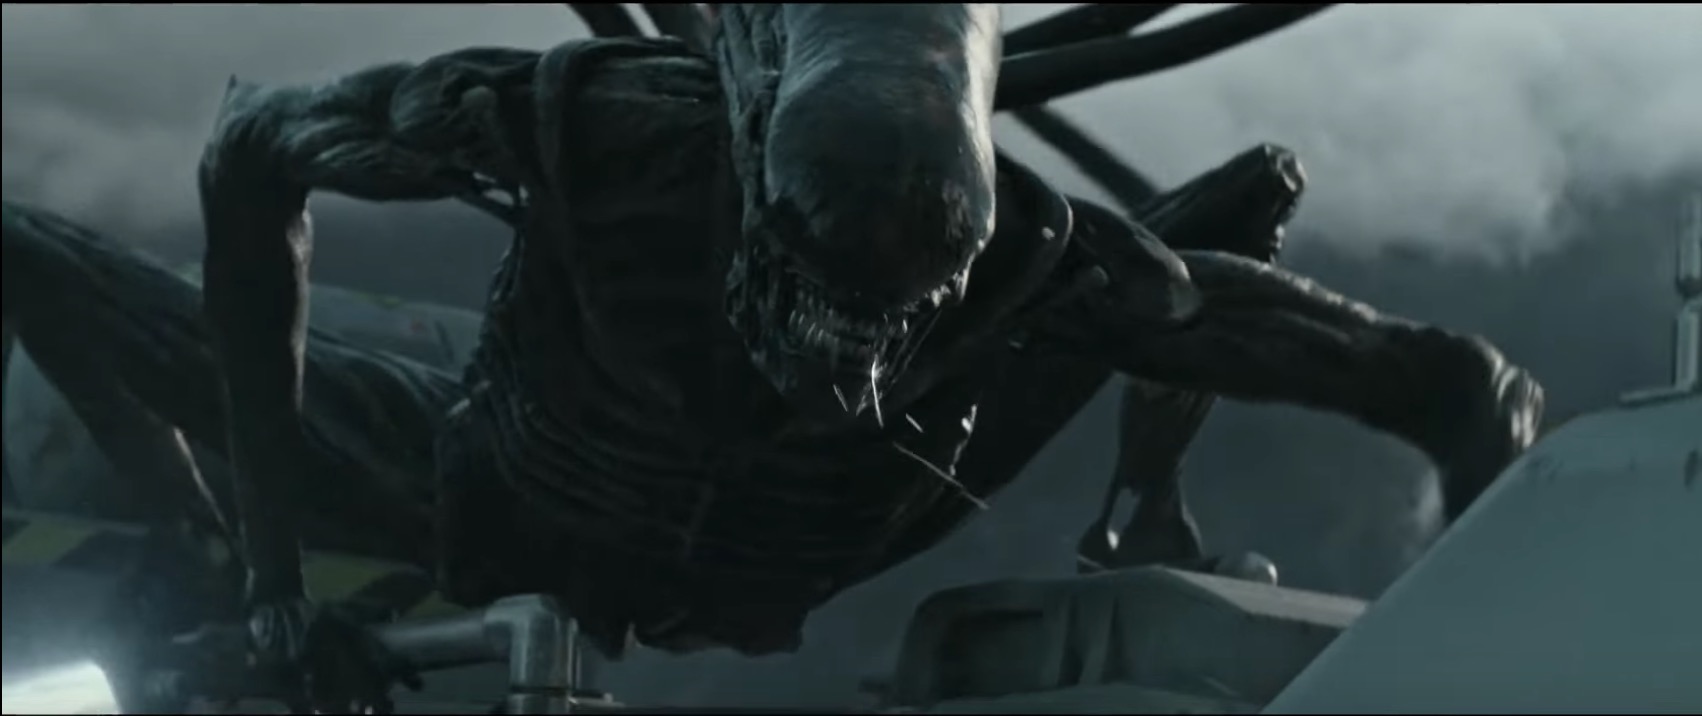 [Watch] Alien: Covenant's action-packed, revealing trailer